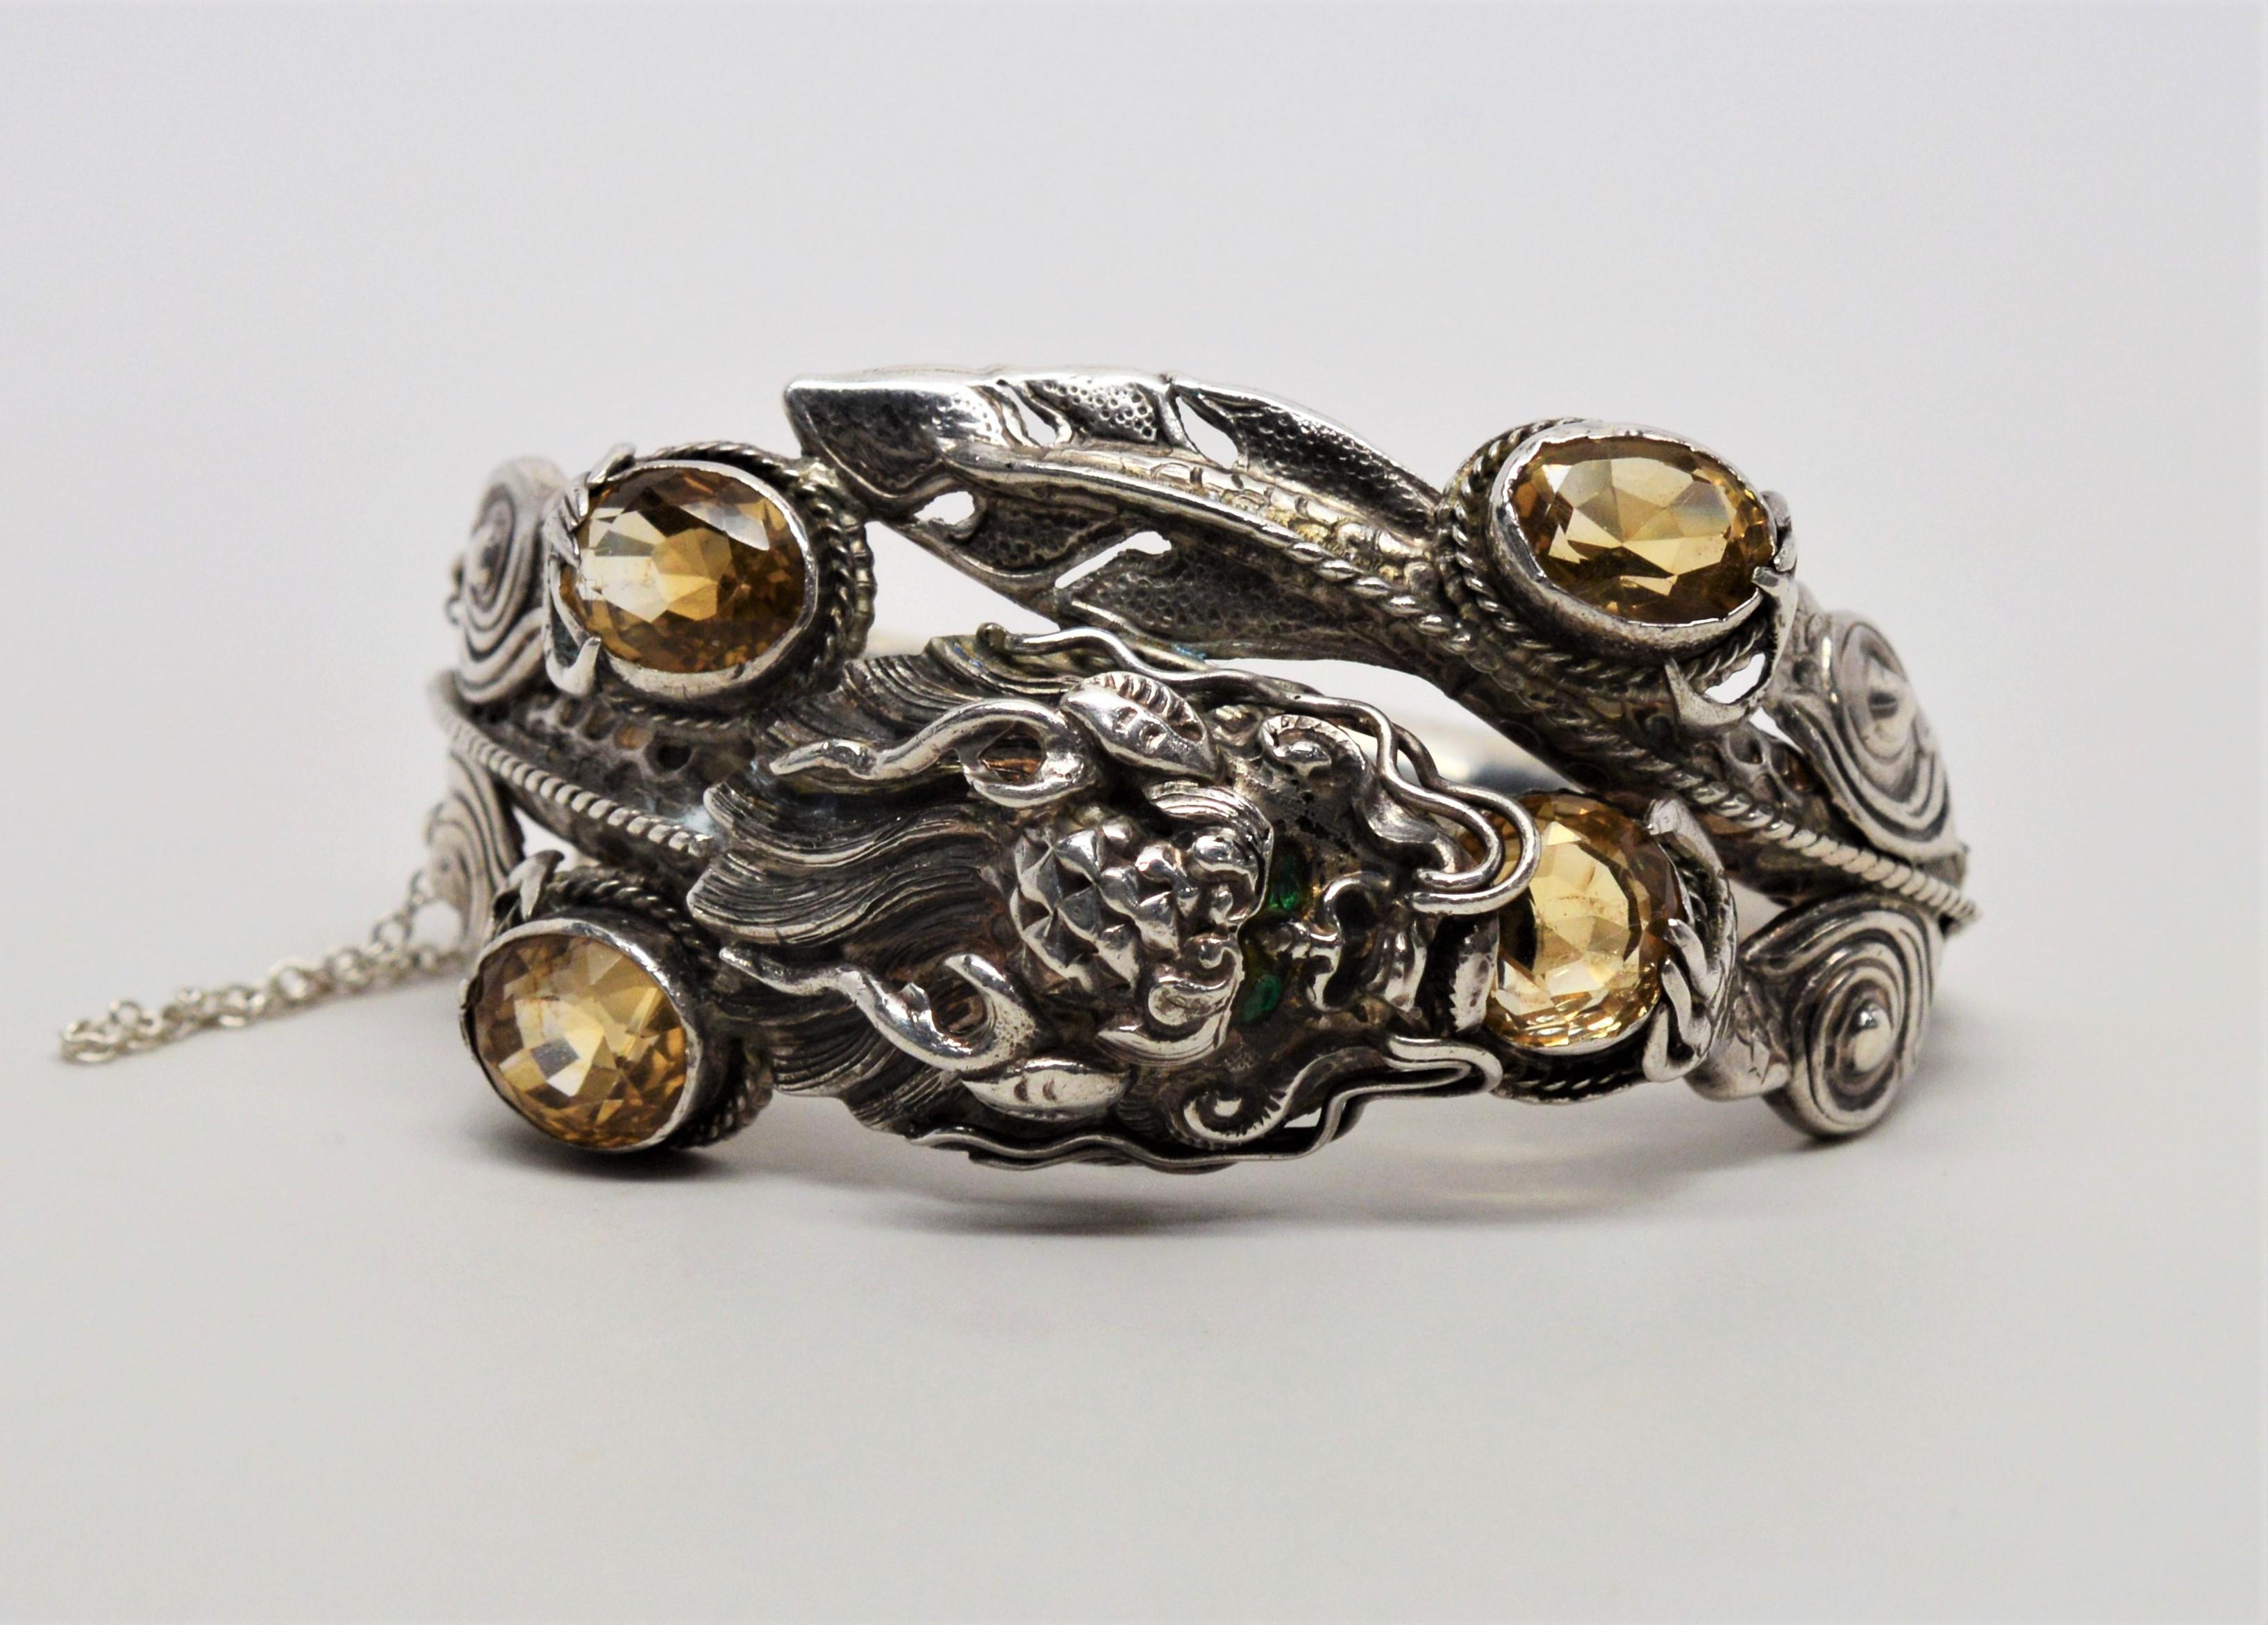 Intense green eyes of emerald peer from the Gargoyle's uniquely curious image handmade in sterling silver on this cuff bracelet.
Surrounded by four 8 -10 mm oval citrine gemstones, this craftsman's piece is assembled from at least sixteen separate